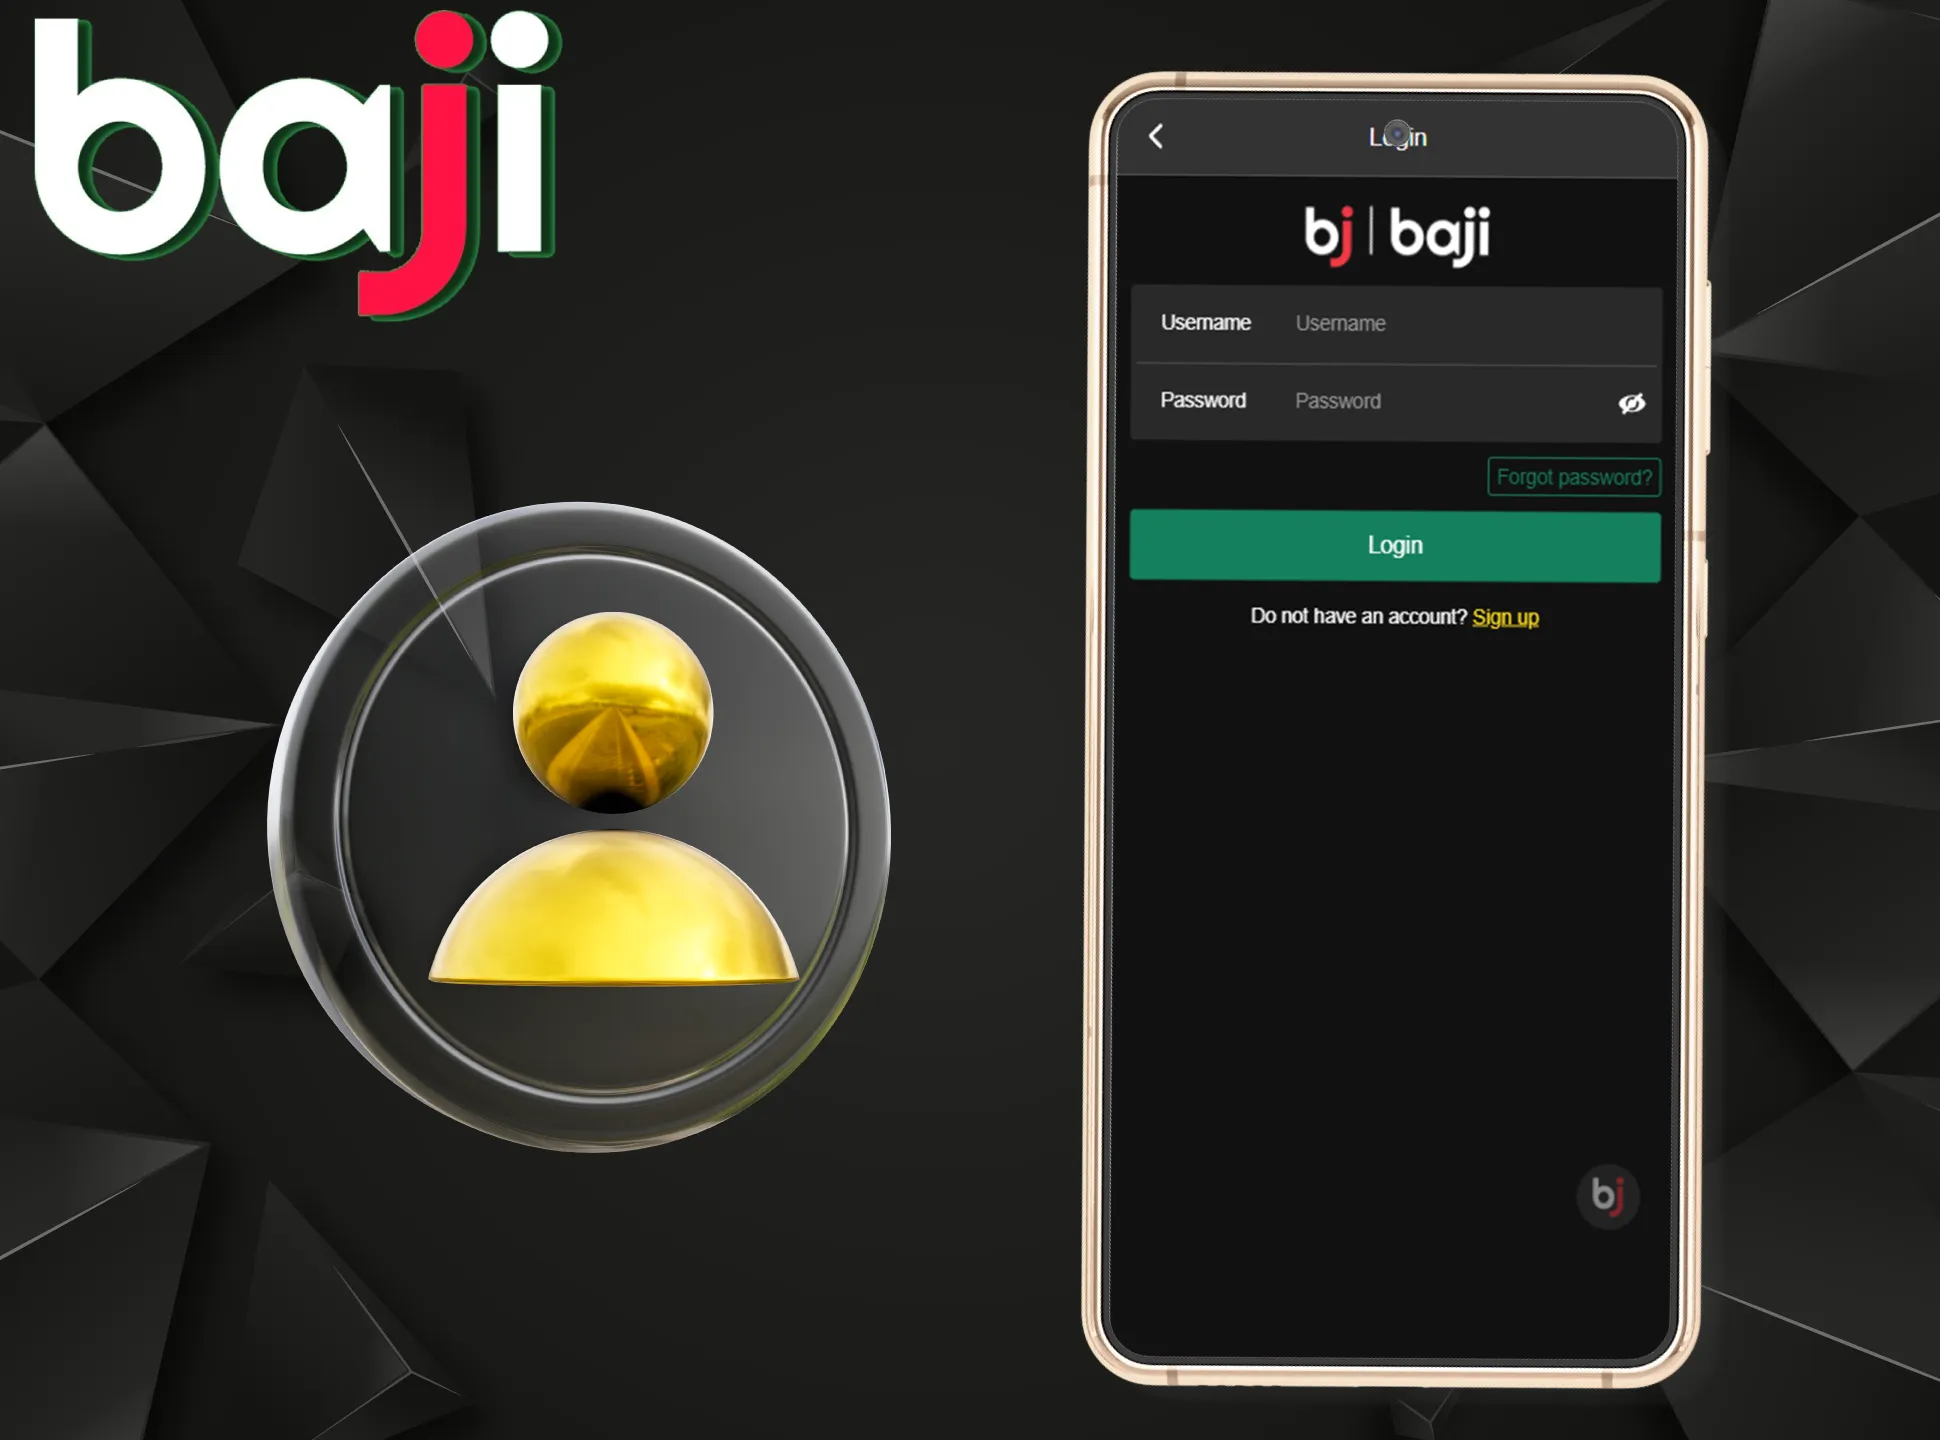 Enter your username and password to log in to your Baji account.